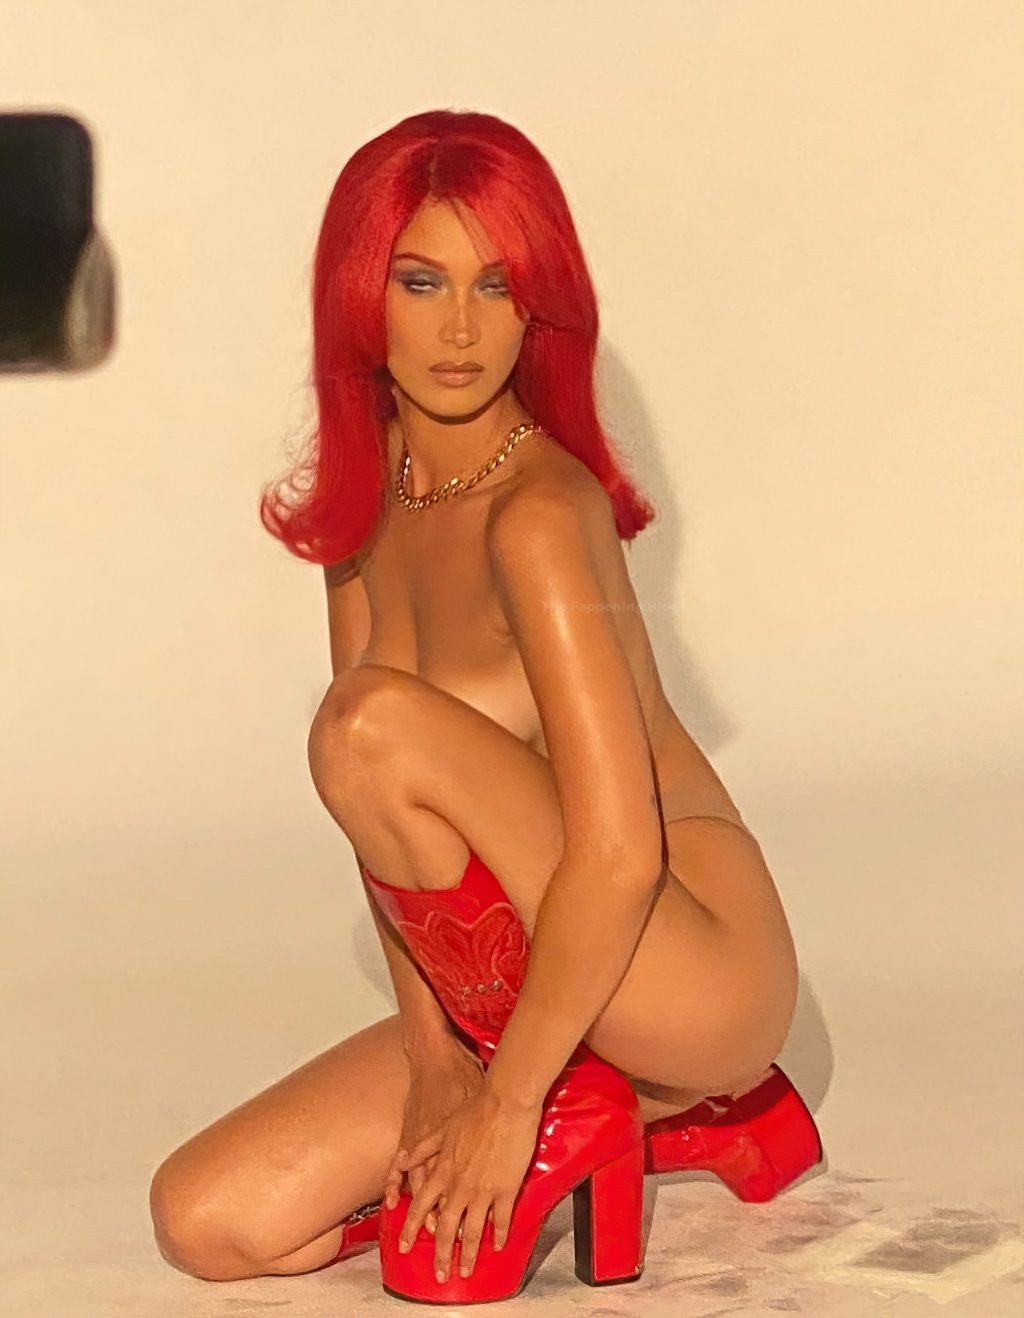 Bella Hadid Poses Topless in Red Boots (4 Hot Photos)